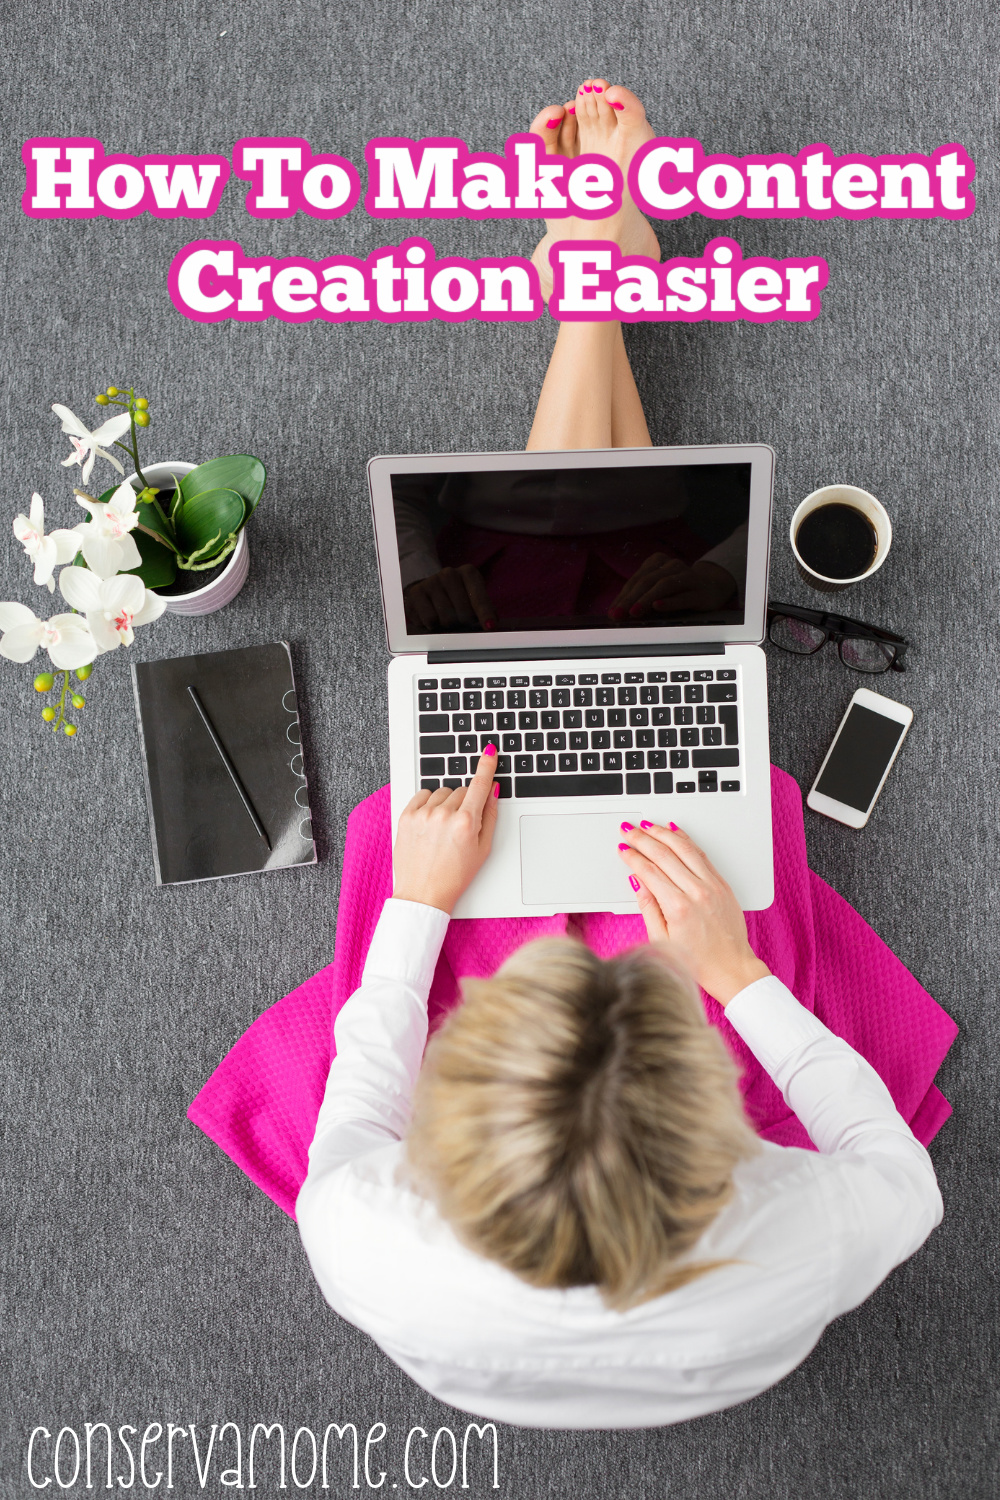 How To Make Content Creation Easier